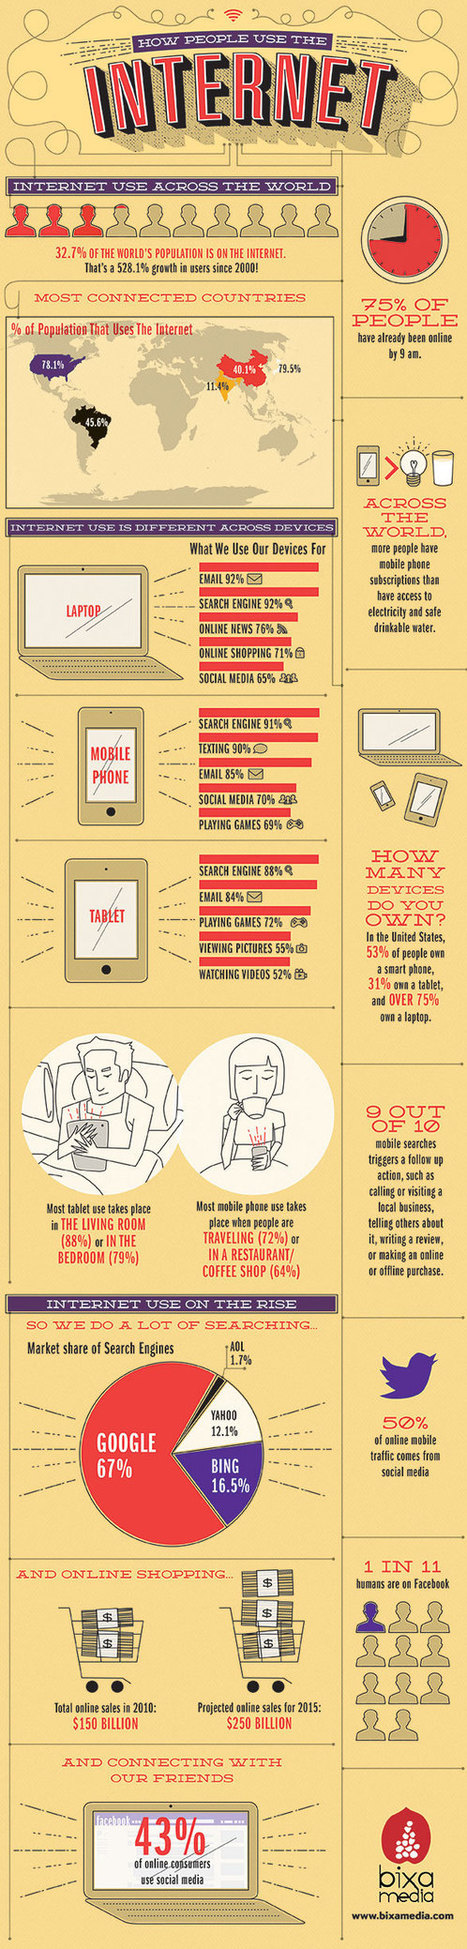 How People Use the Internet [INFOGRAPHIC] | Daily Magazine | Scoop.it